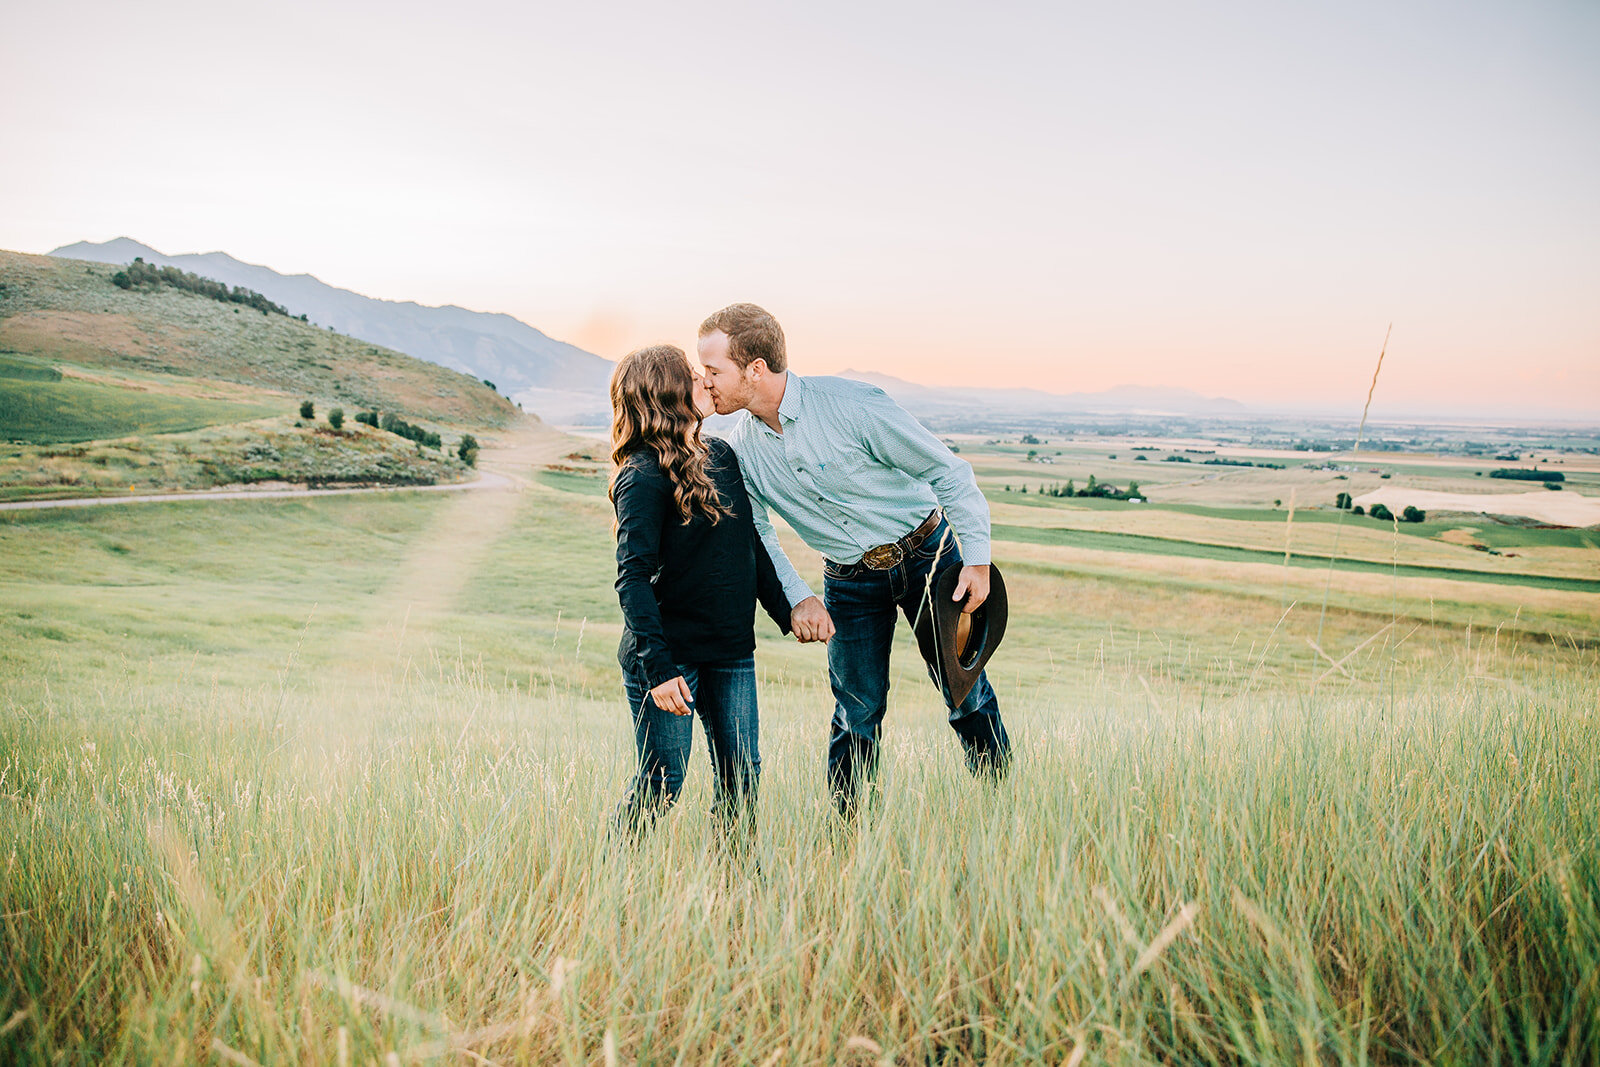  Engagement session sunset photography boyfriend girlfriend couple kissing posing inspo bride to be couple holding hands in grass field couple goals happy couple wildflowers country couple what to wear to engagements cache valley photographer paradis